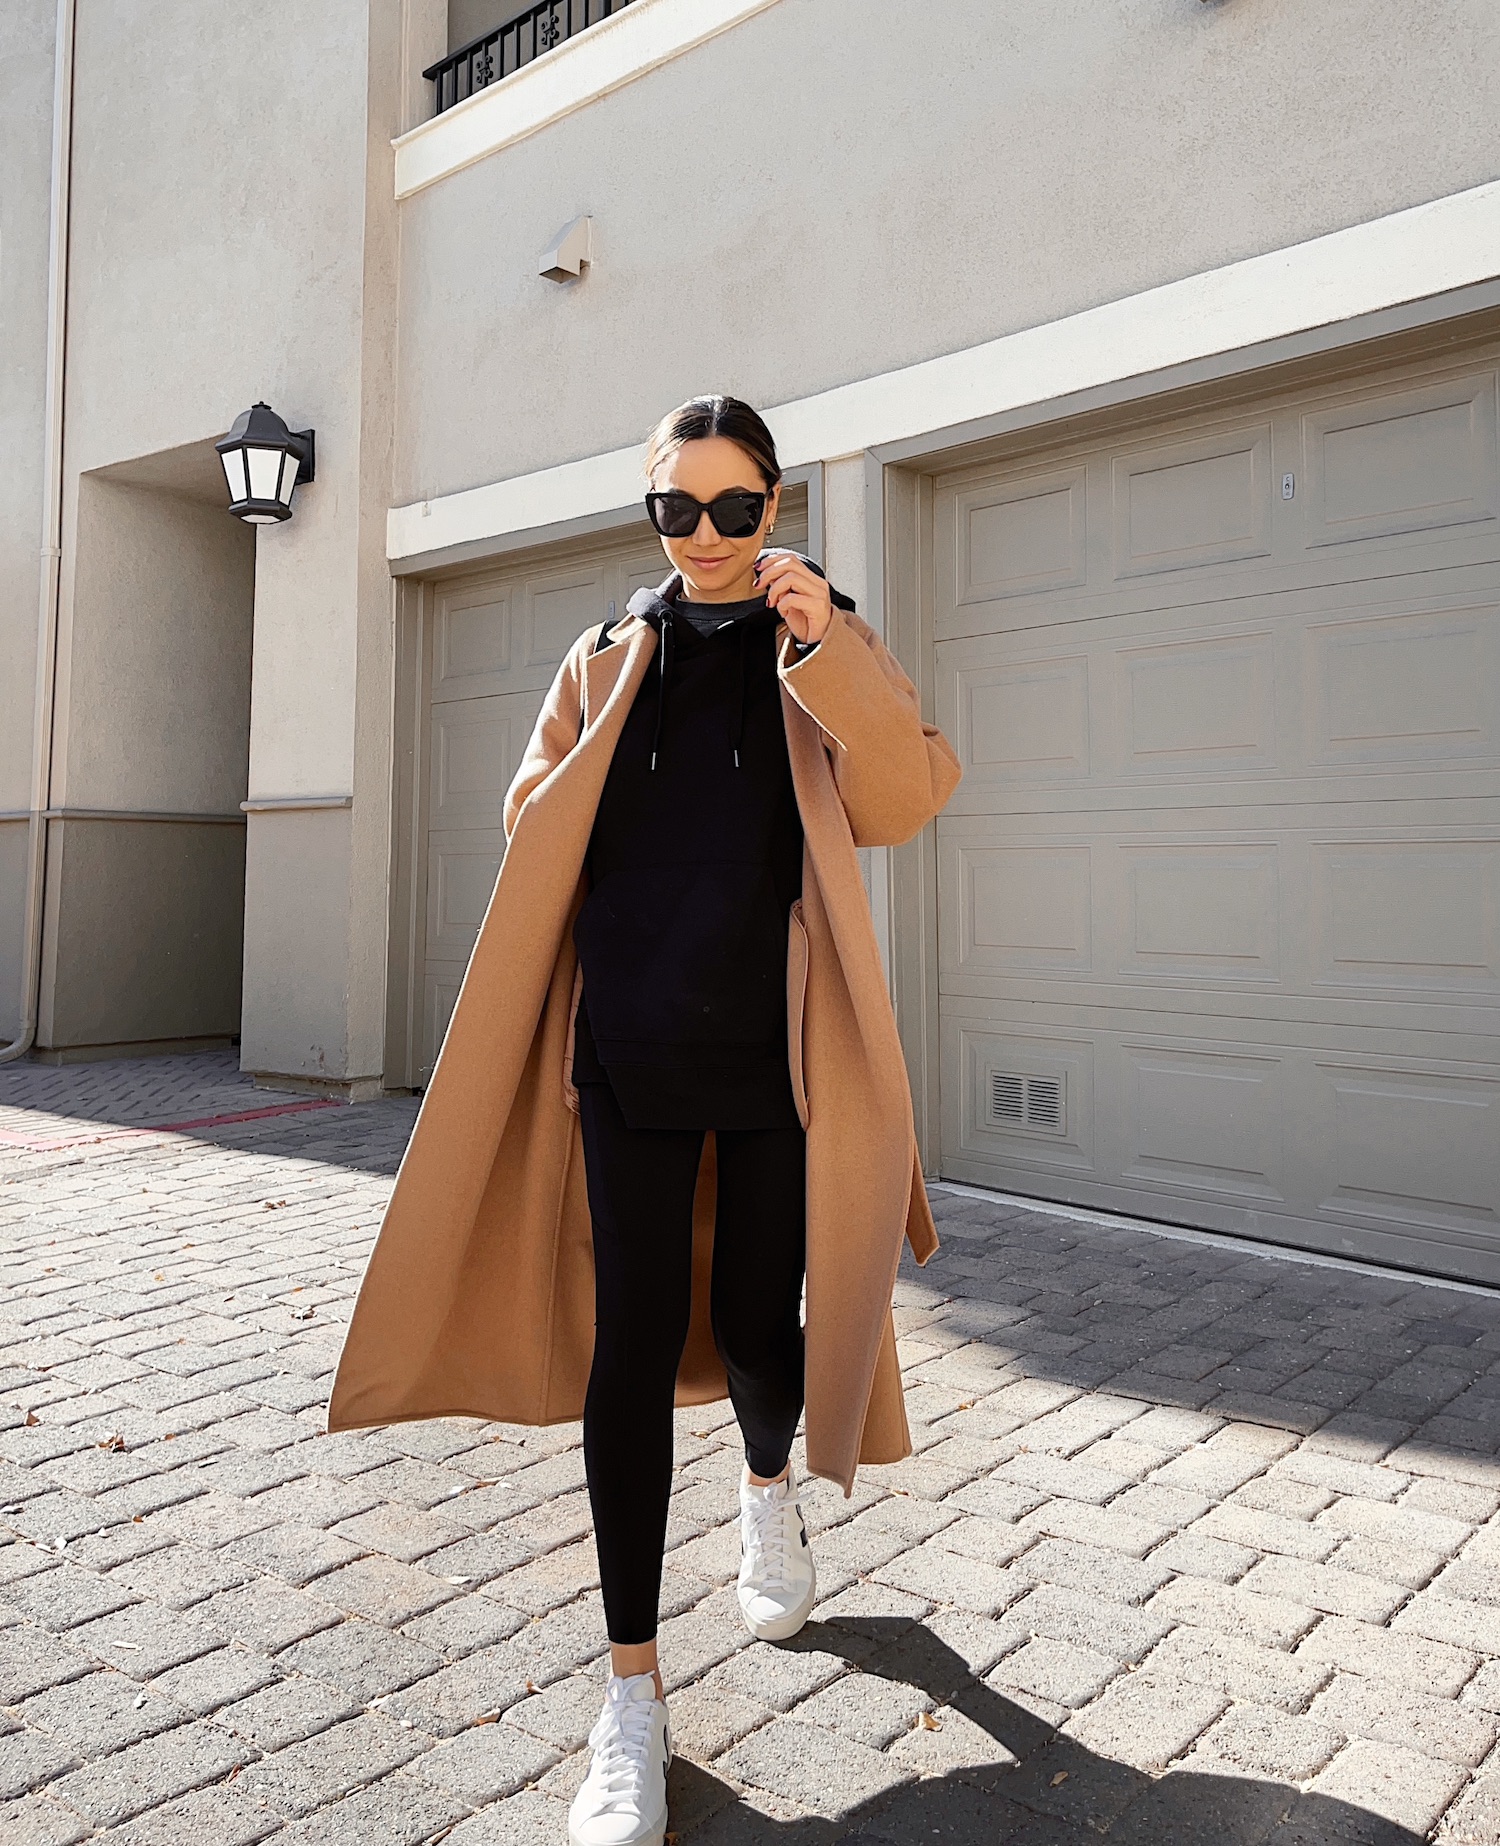 5 Athleisure Outfit Ideas for a Chic and Comfortable Look